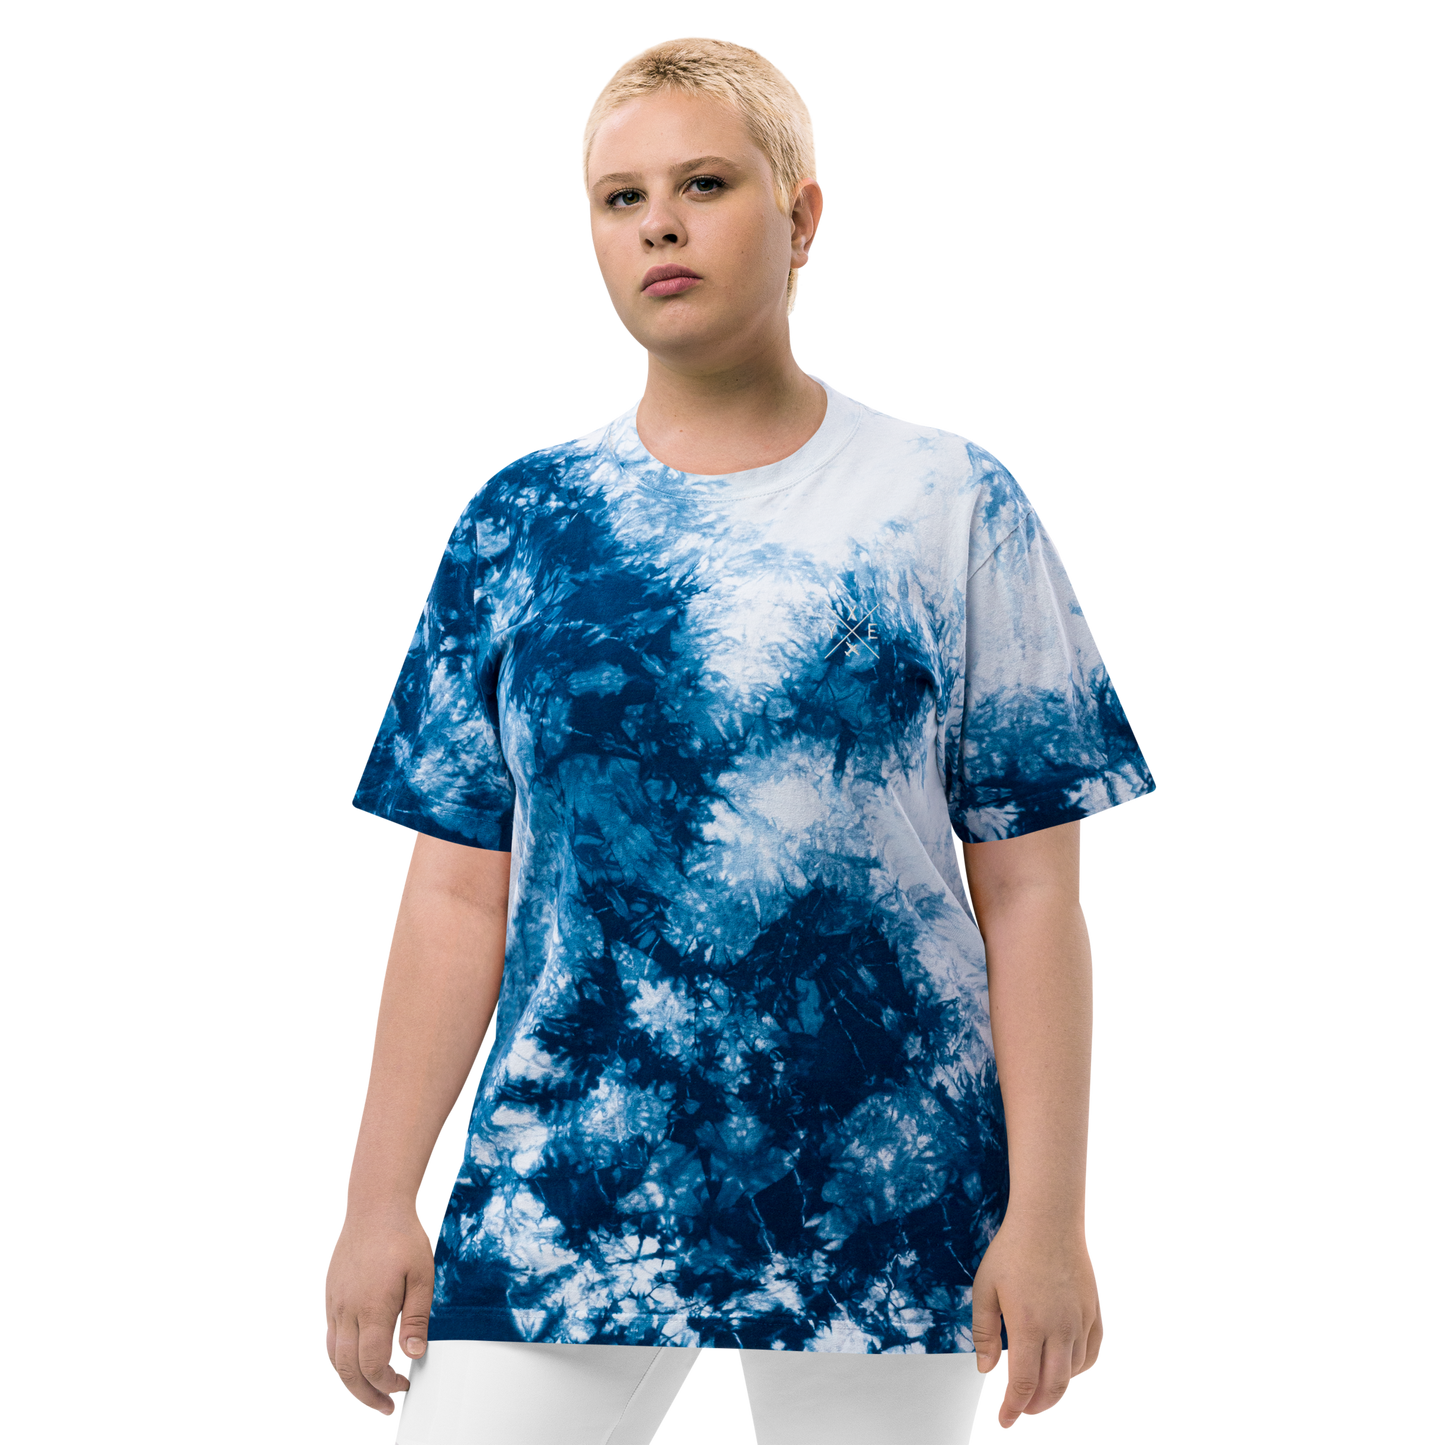 YHM Designs - YXE Saskatoon Oversized Tie-Dye T-Shirt - Crossed-X Design with Airport Code and Vintage Propliner - White Embroidery - Image 08